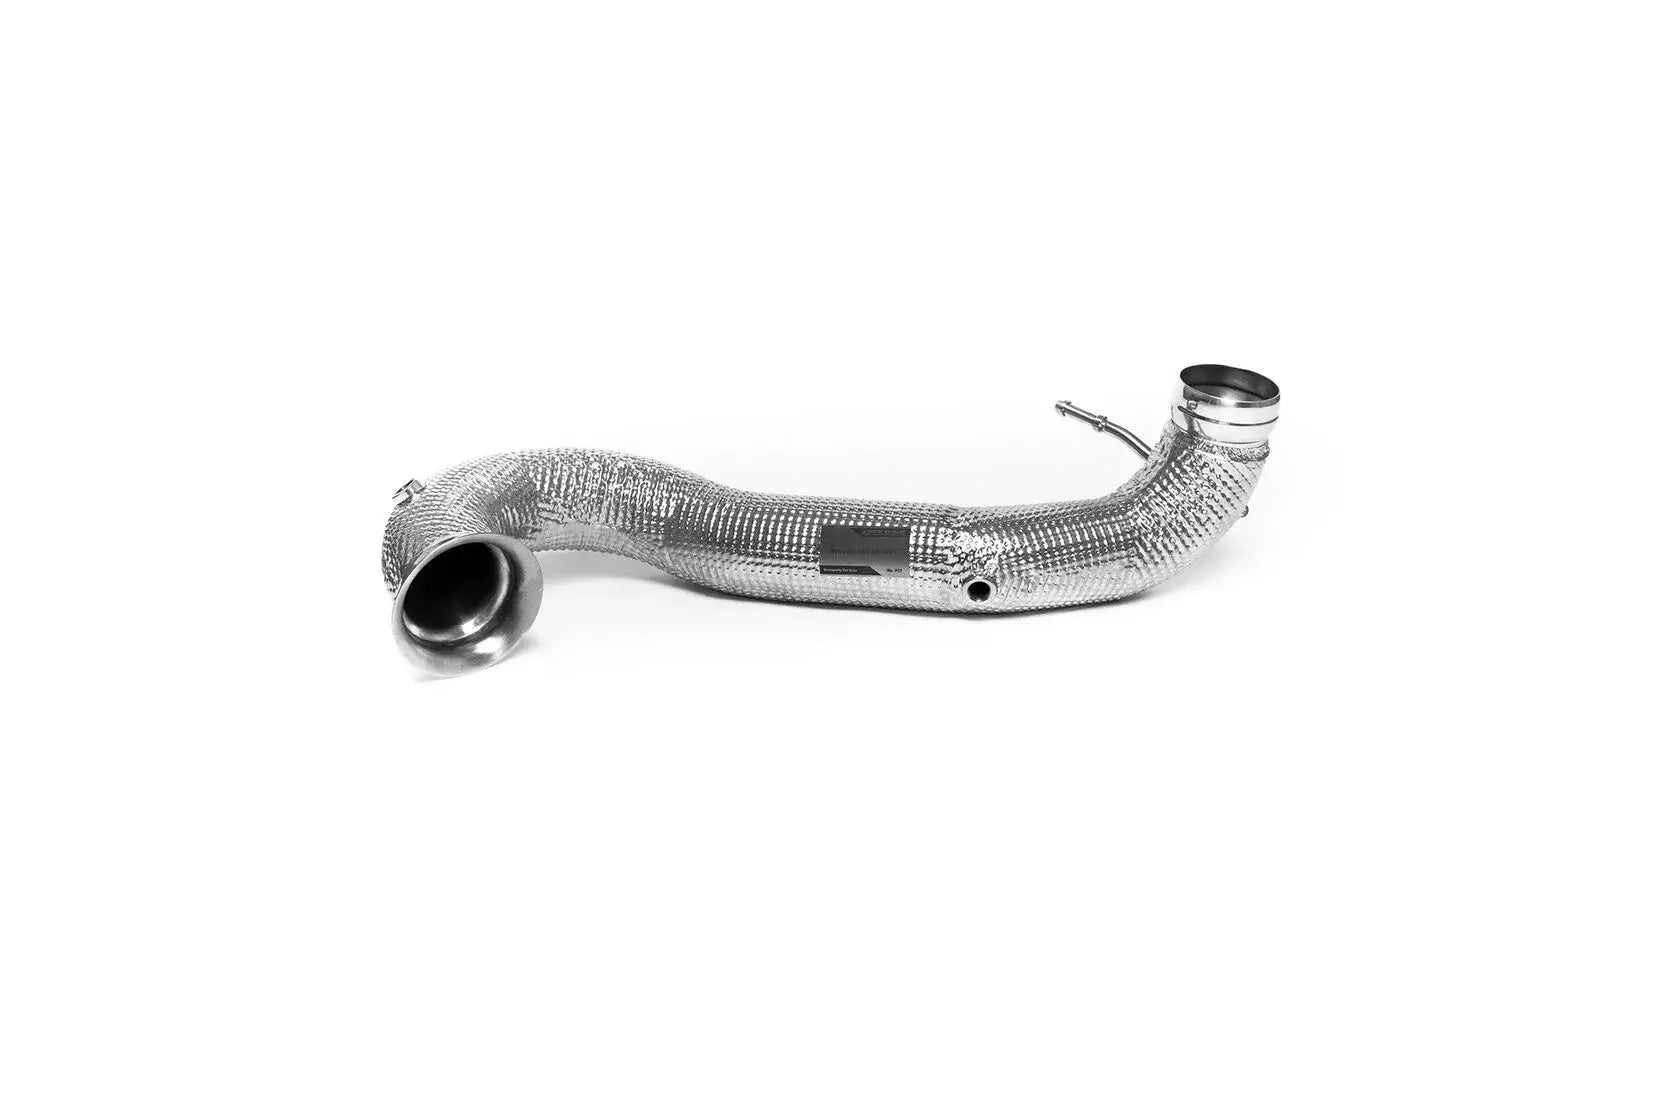 DEIKIN 10-MB.A45.W176-DPT Downpipe for Mercedes-AMG A45 (w176) with thermal insulation HeatShield Photo-1 